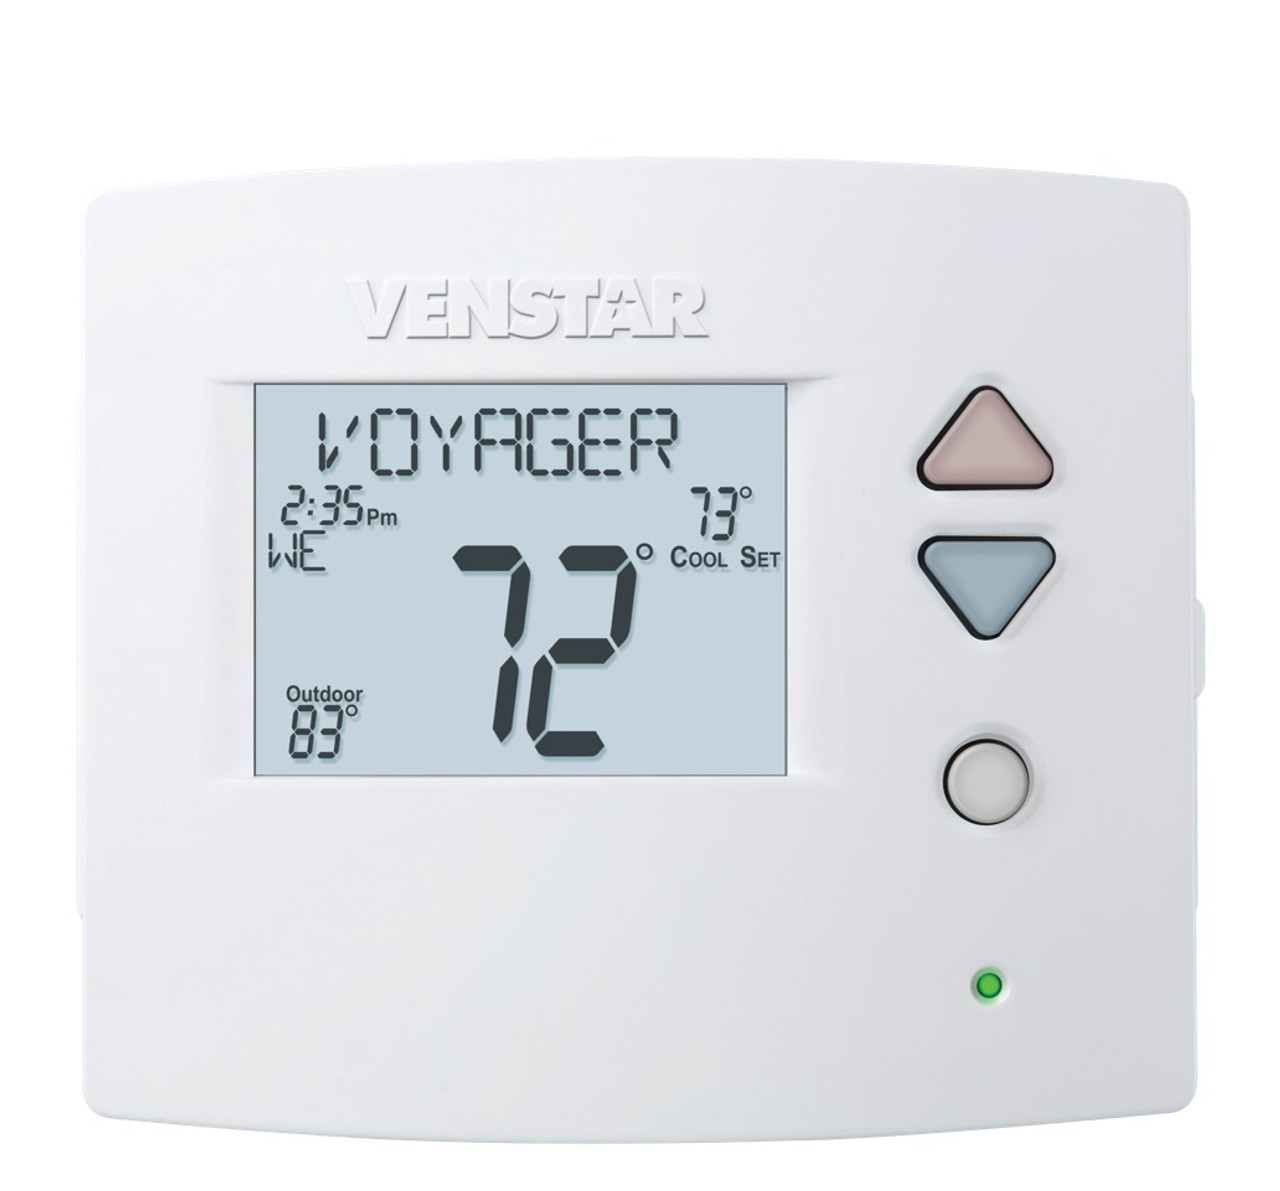 Venstar T3700 Voyager Residential Programmable Thermostat 2H/1C